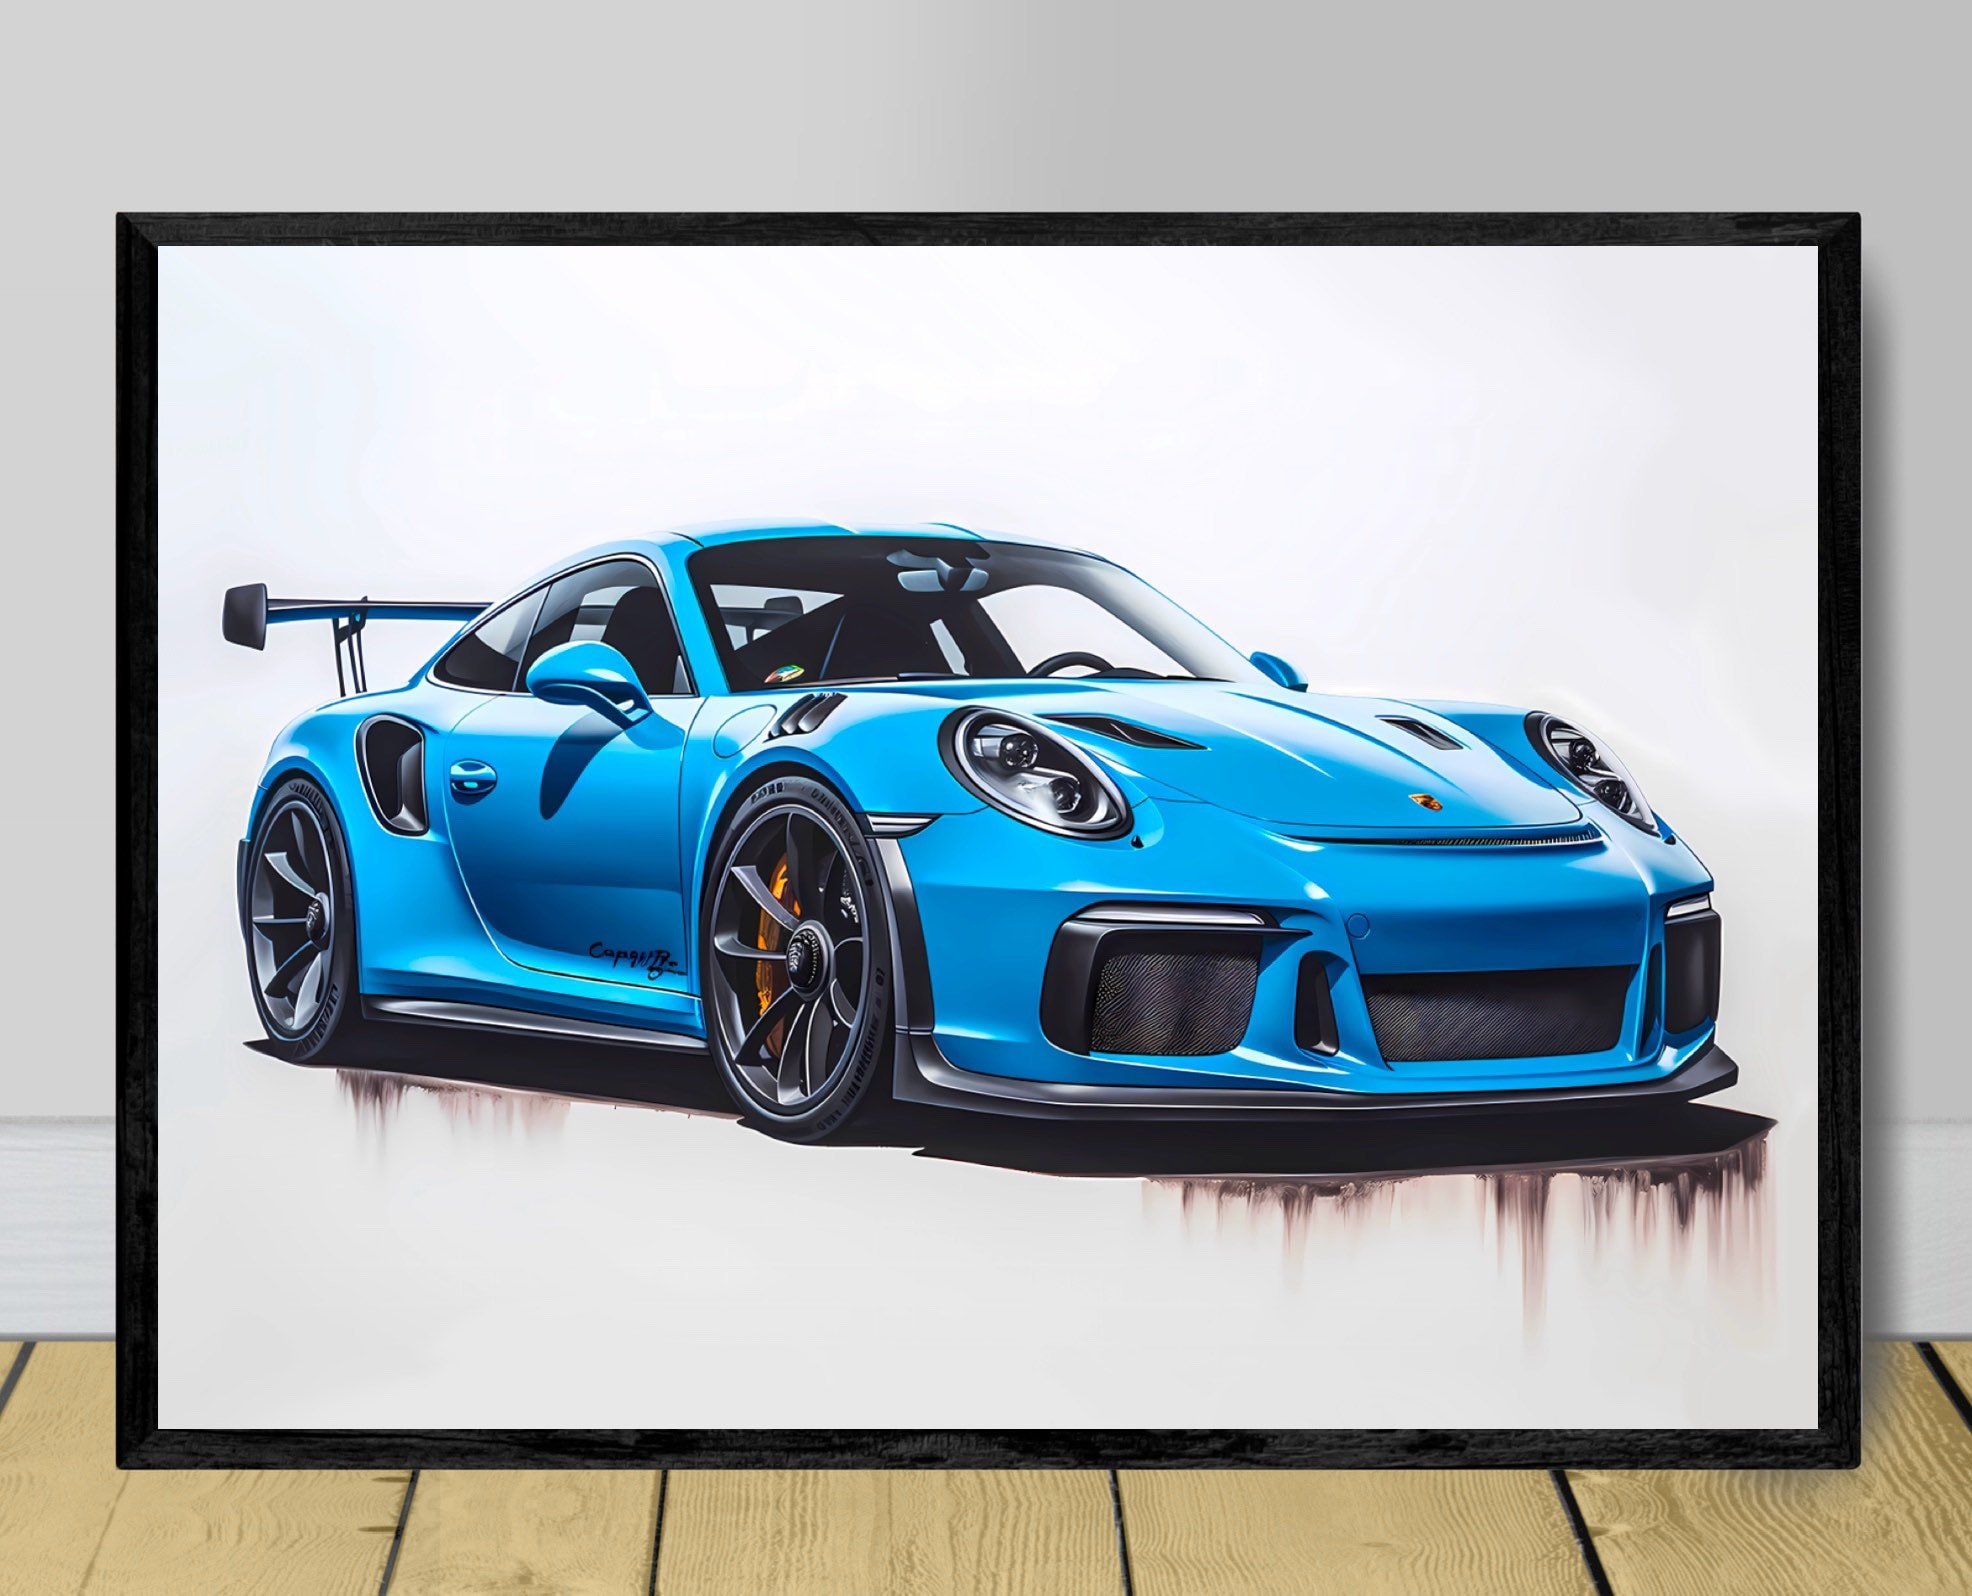 Porsche gt3 Rs Graphic T-Shirt by stephanemaro